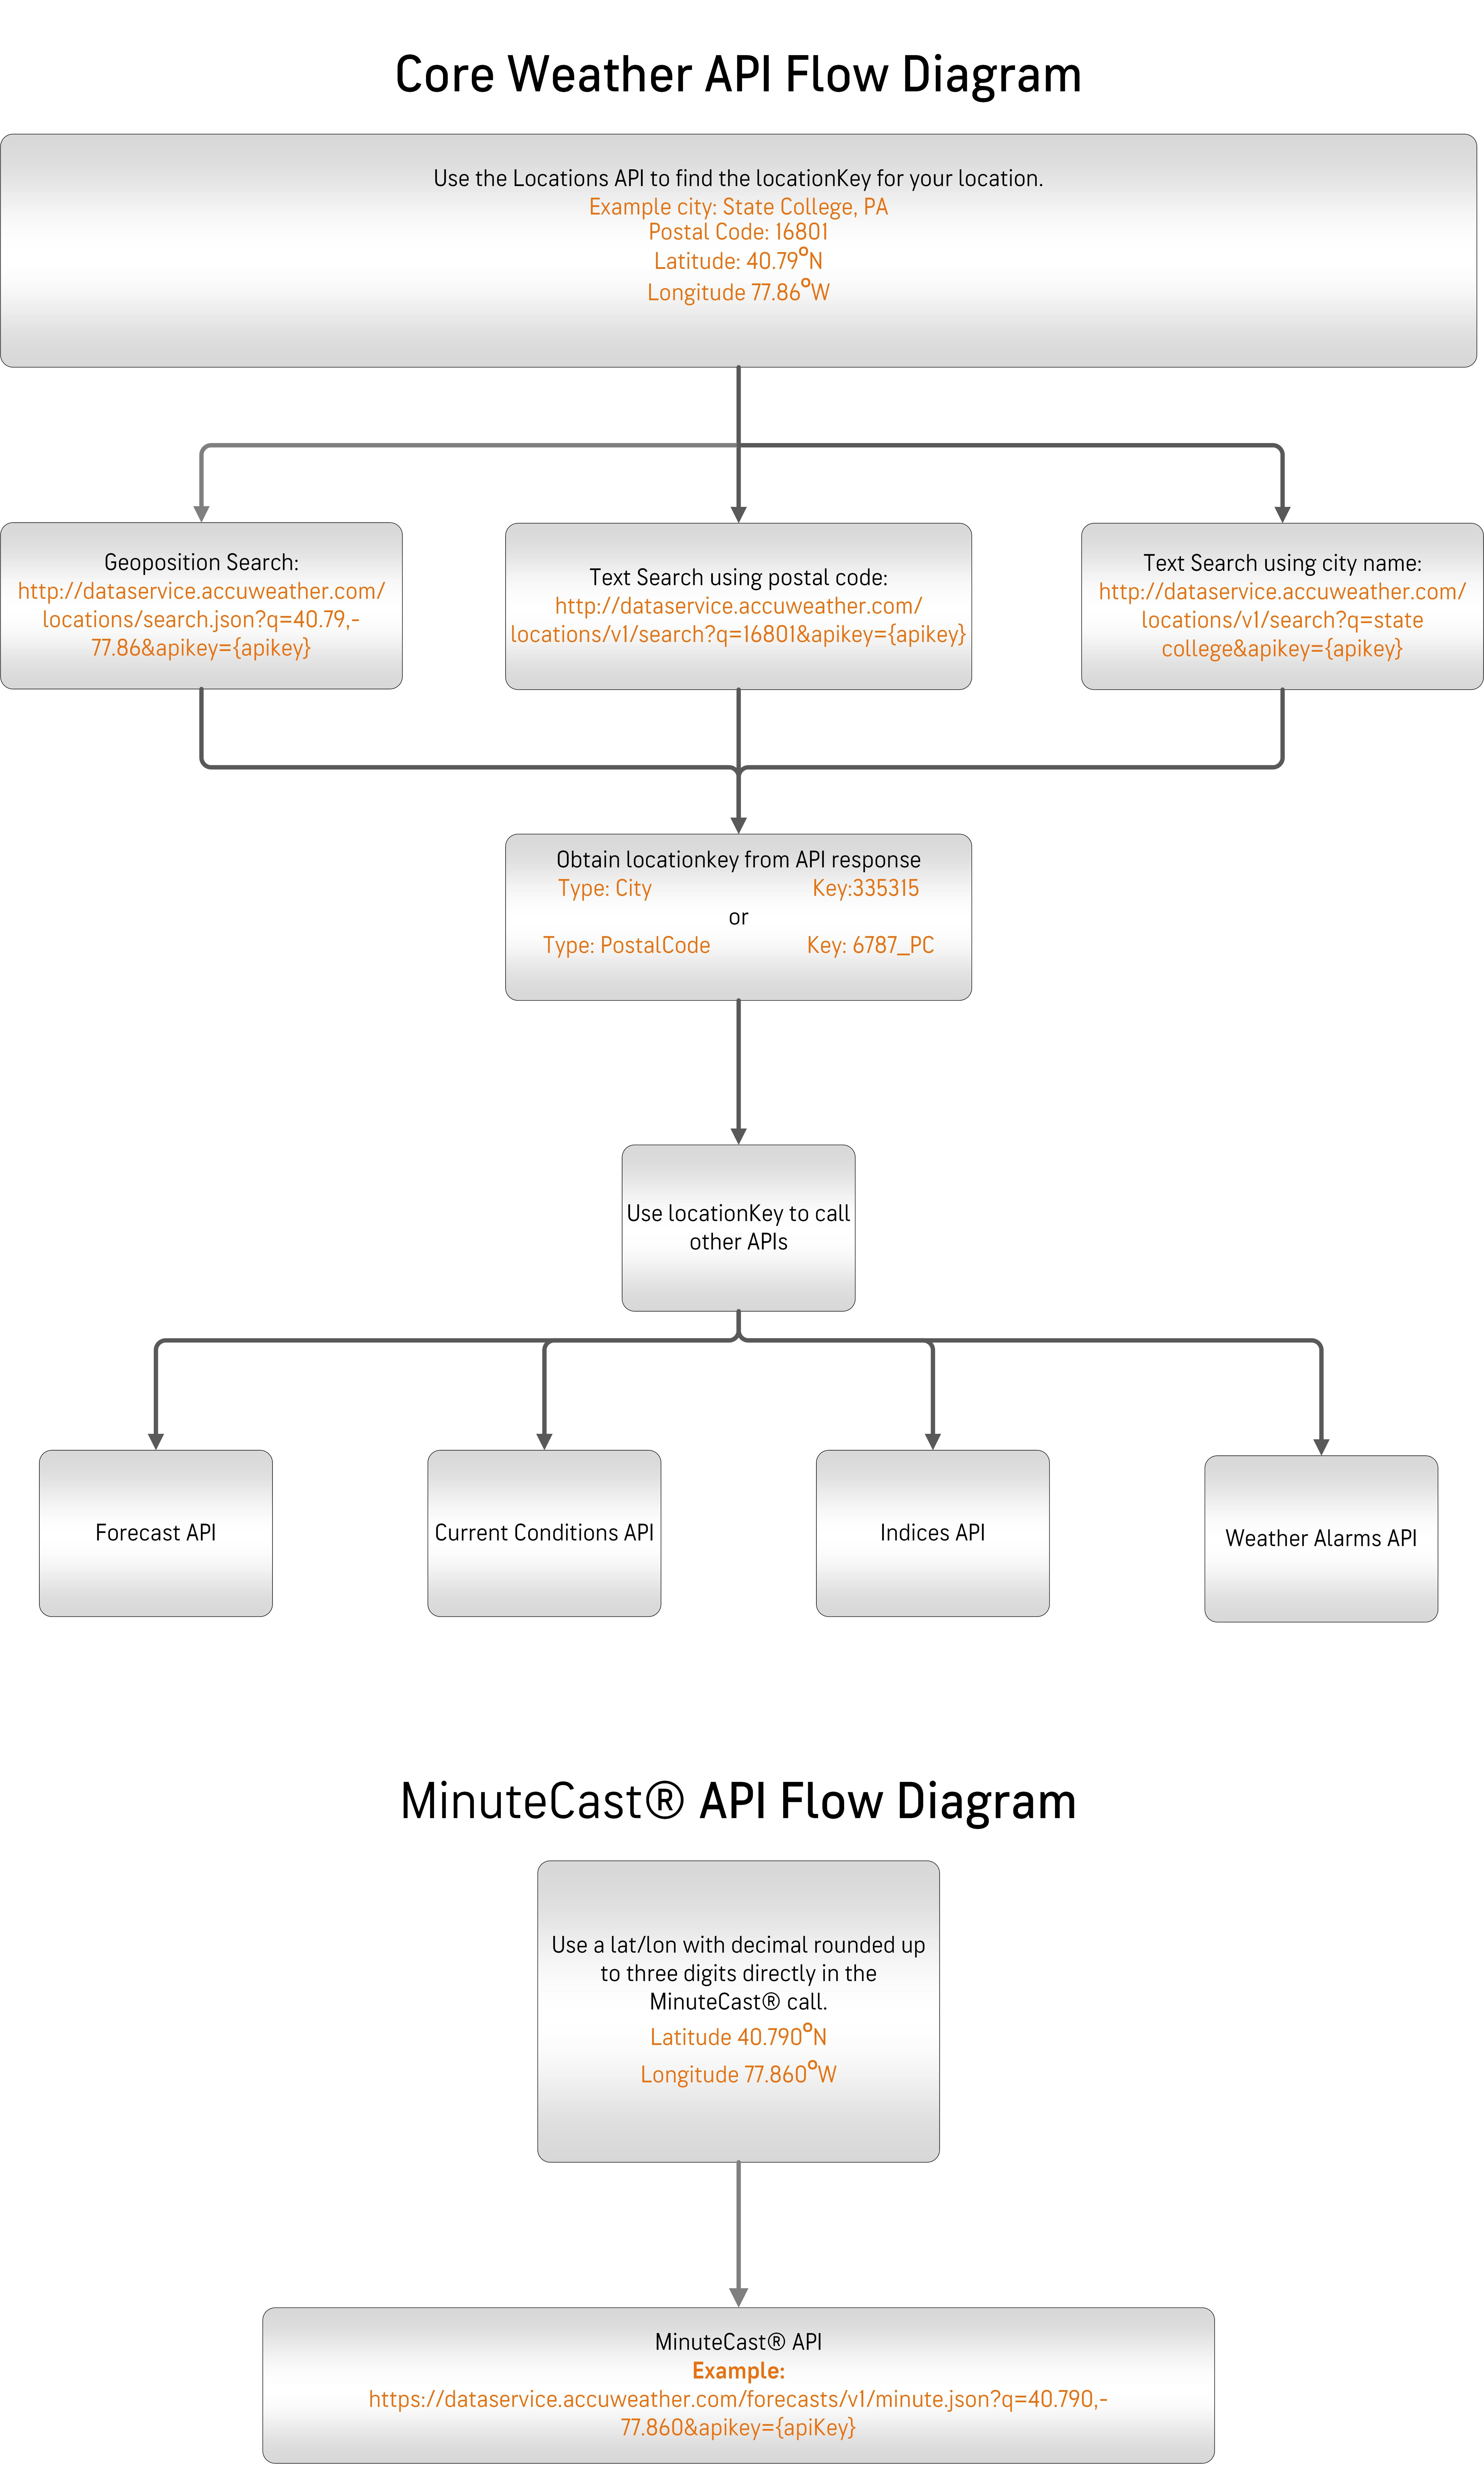 Core Weather and MinuteCast® API Flow Diagram